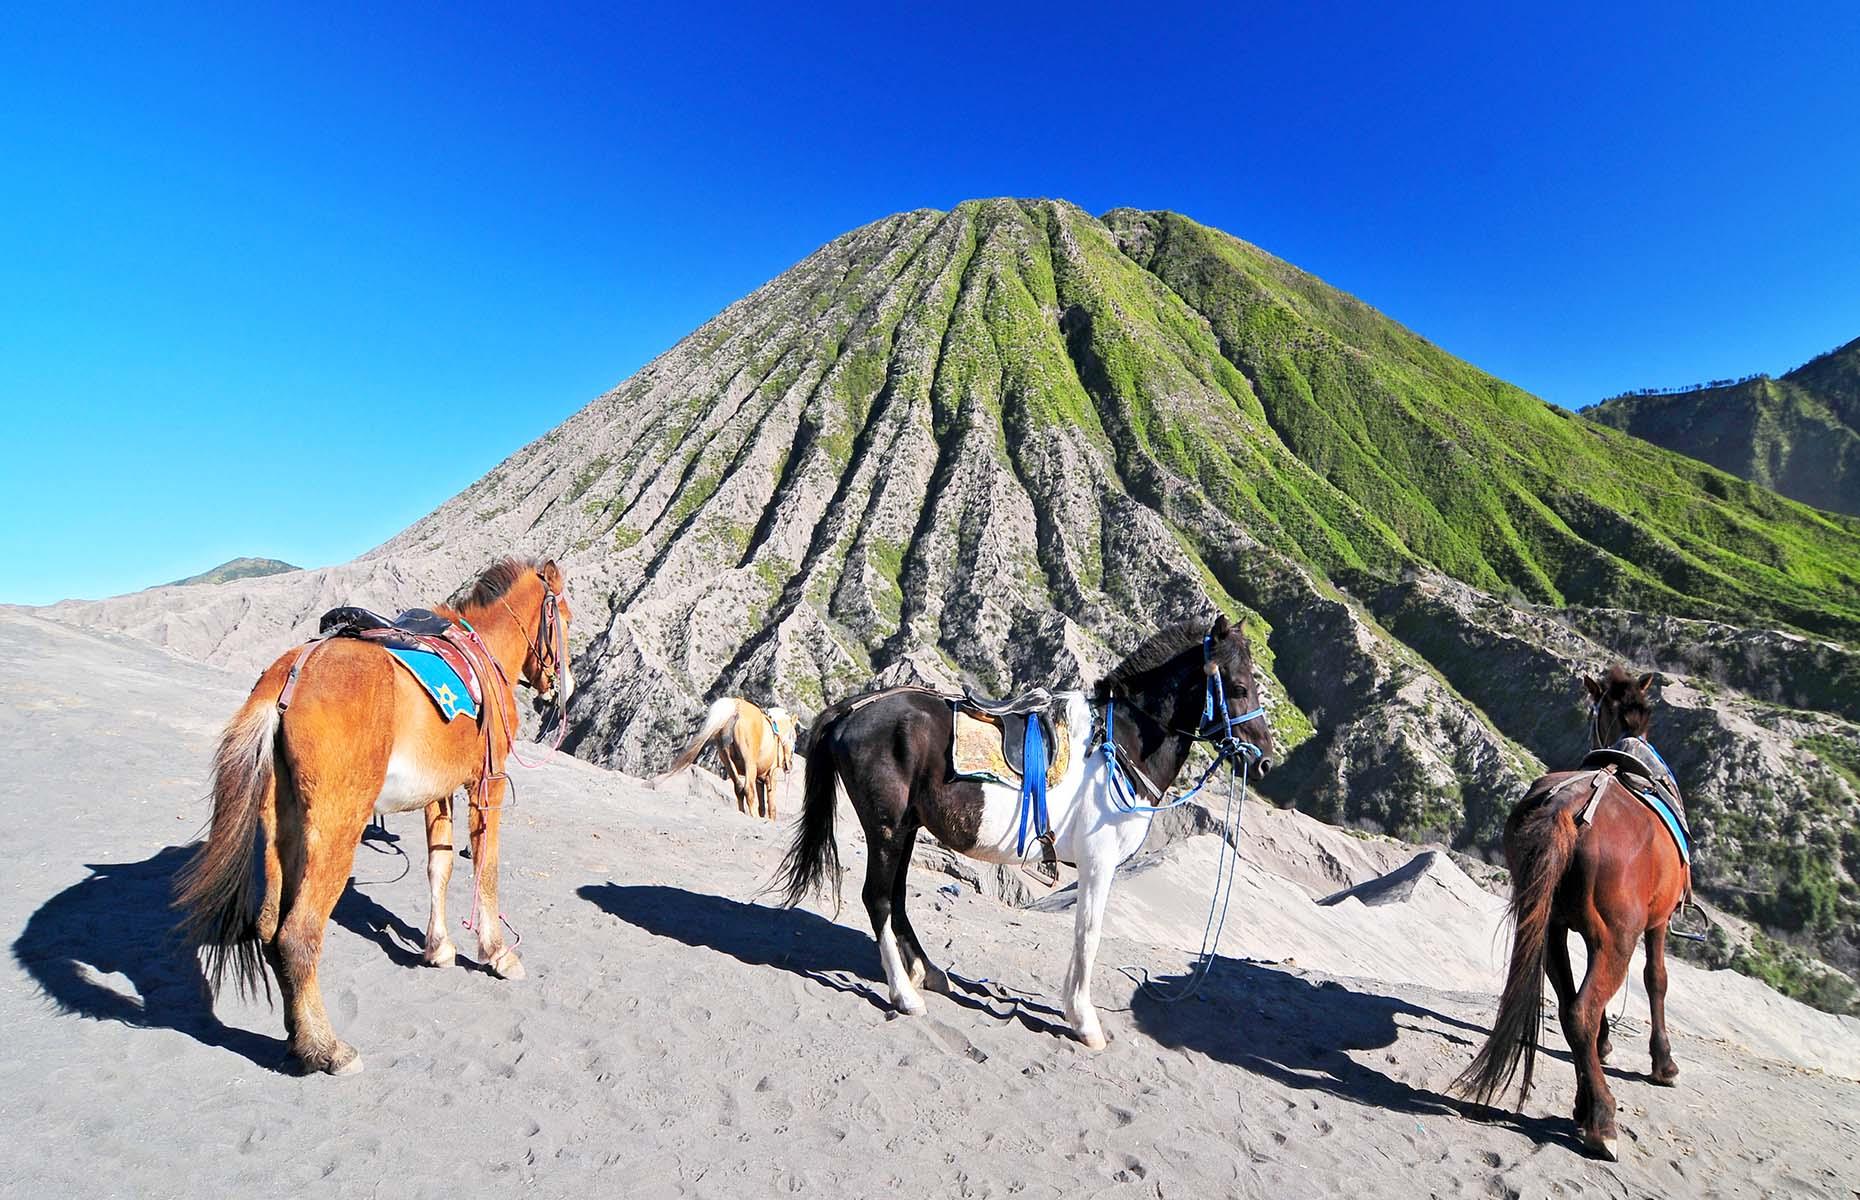 Normally, the majority of visitors book onto a tour and travel by Jeep in the early hours of the morning to a viewpoint to watch the sunrise over Mount Bromo. Then a sea of sand has to be crossed to get anywhere near the actual crater – it's possible to hike, but usually locals offer bike or horseback rides.